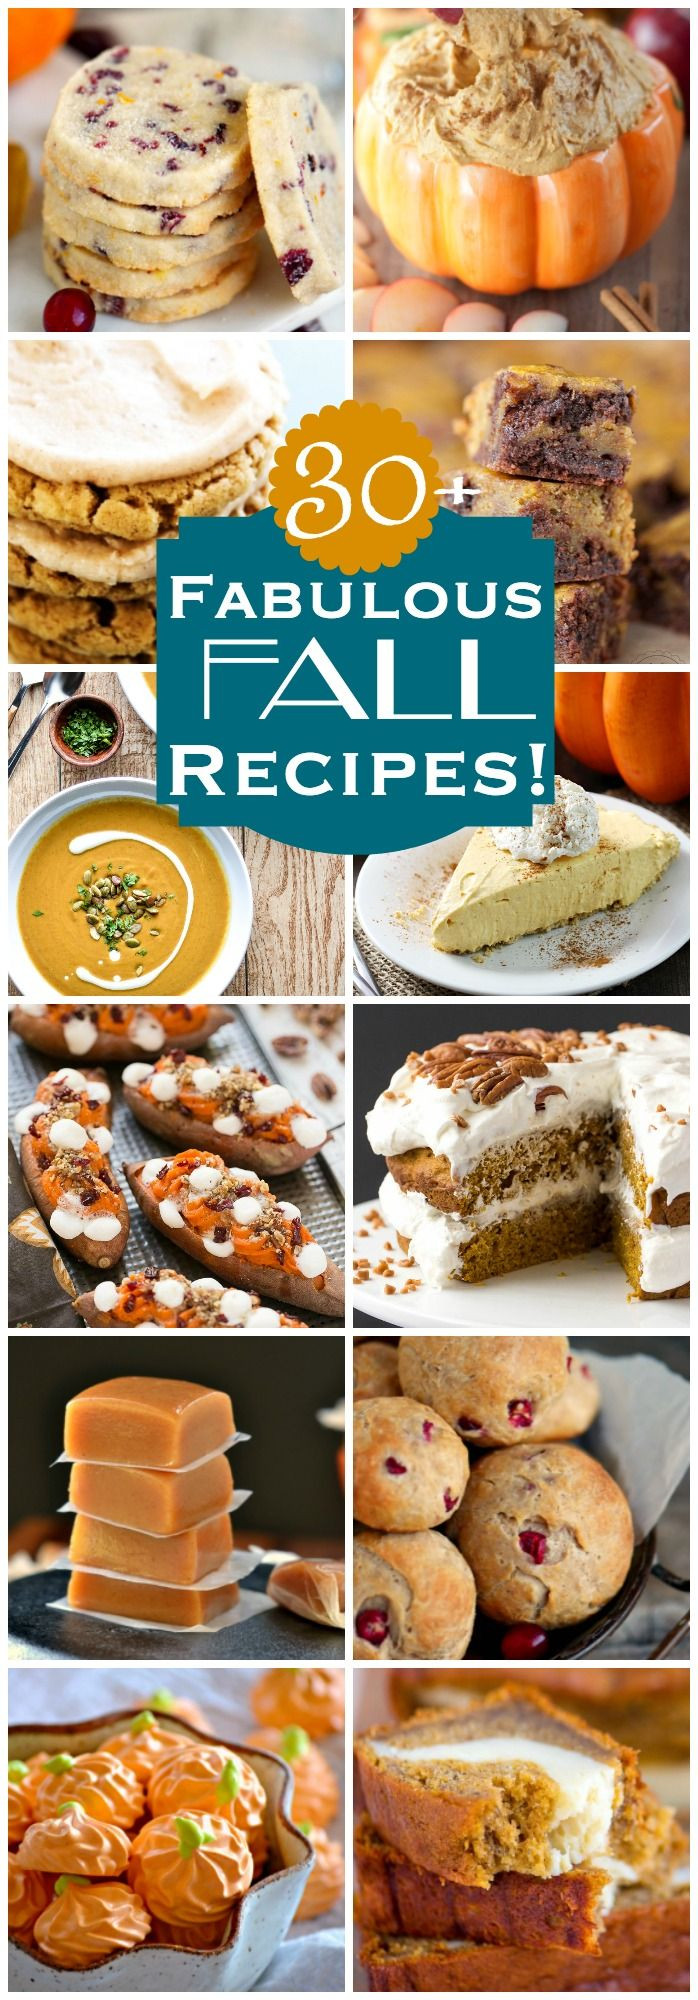 Fall Recipes Dinner
 17 Best images about Seasons Fall on Pinterest